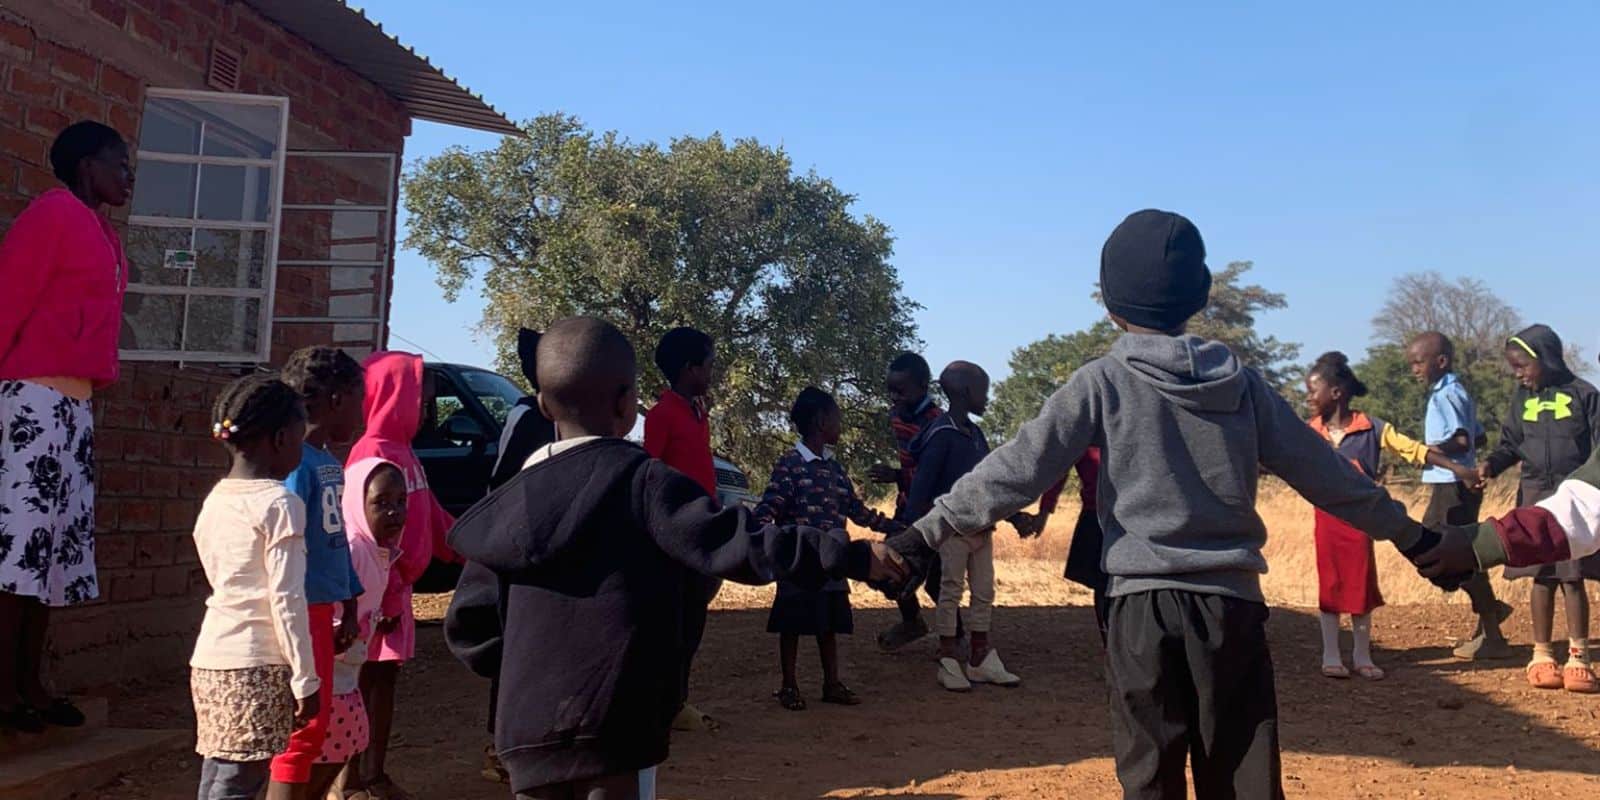 children in Zambia holding each other and forming a circle outdoor